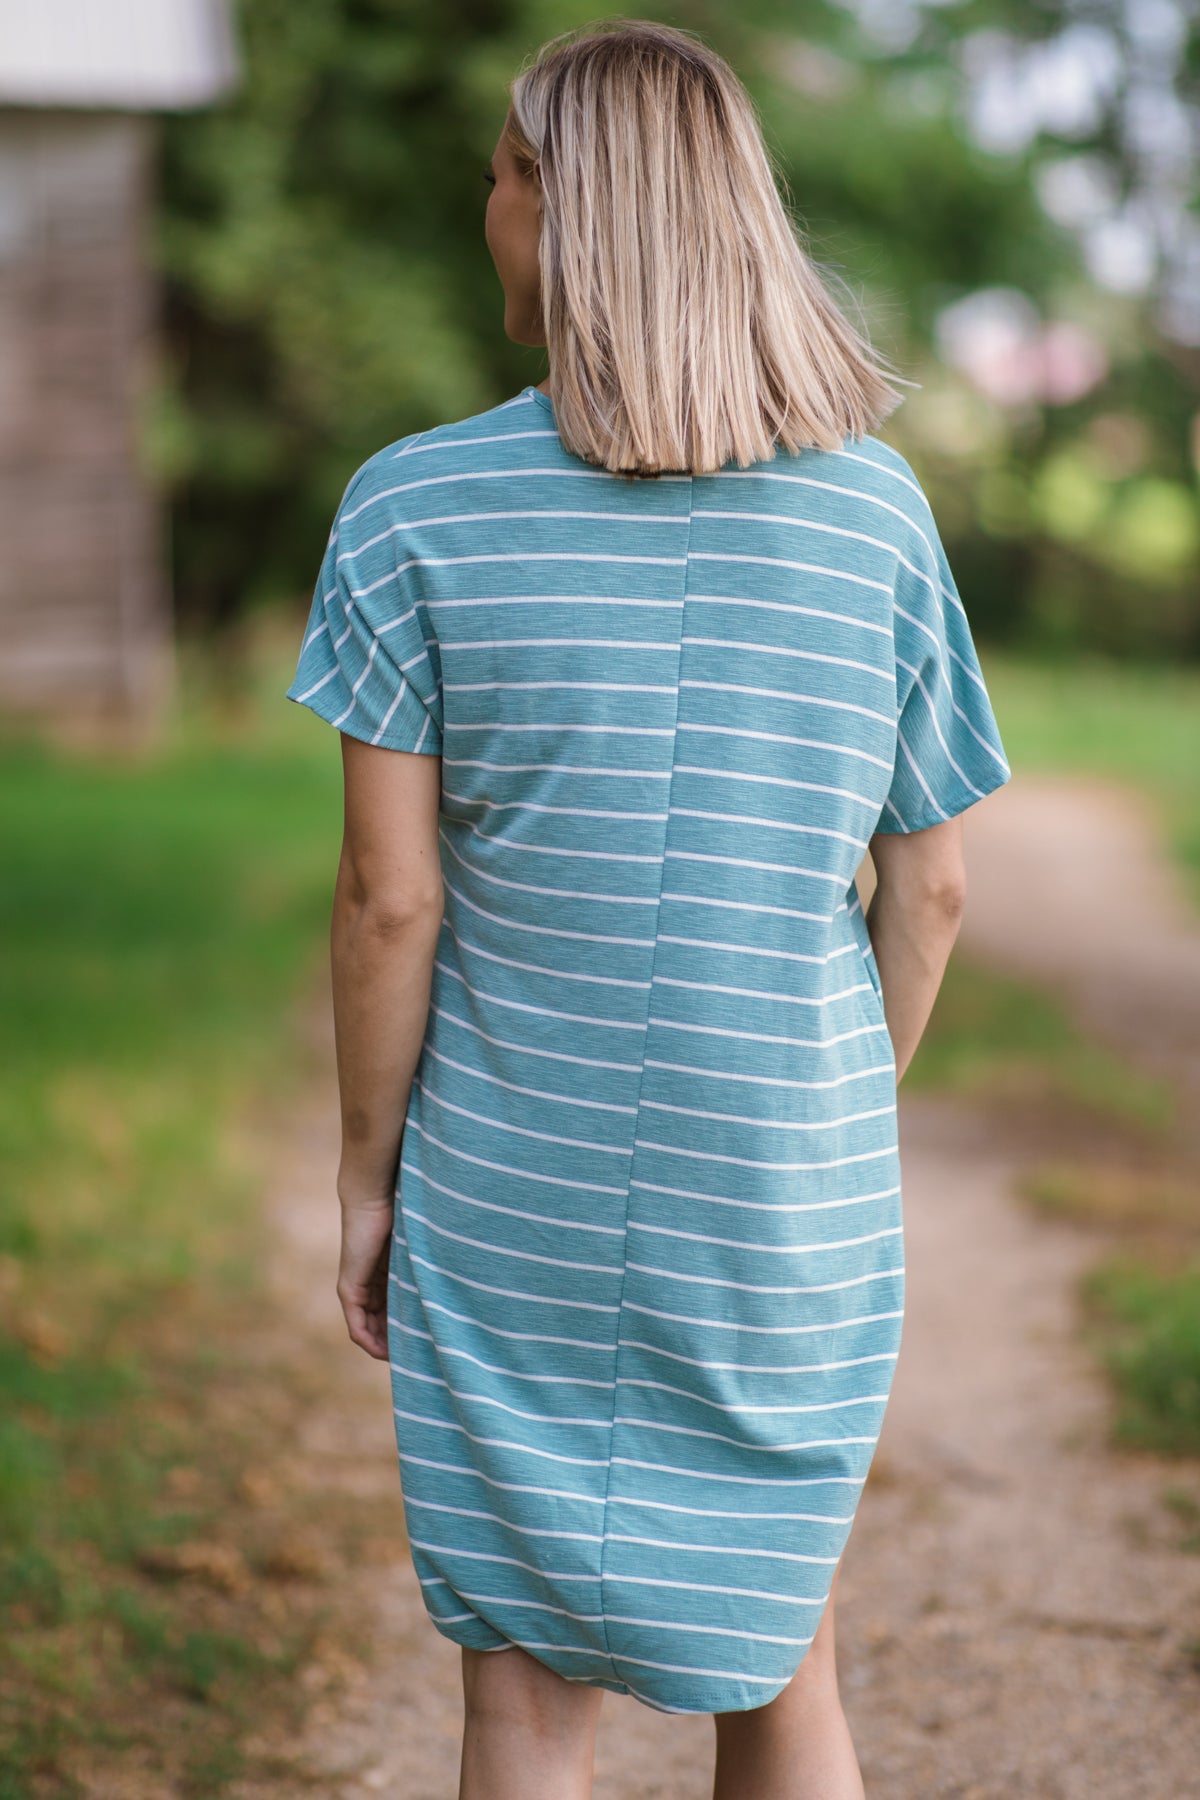 Teal and White Stripe Short Sleeve Dress - Filly Flair